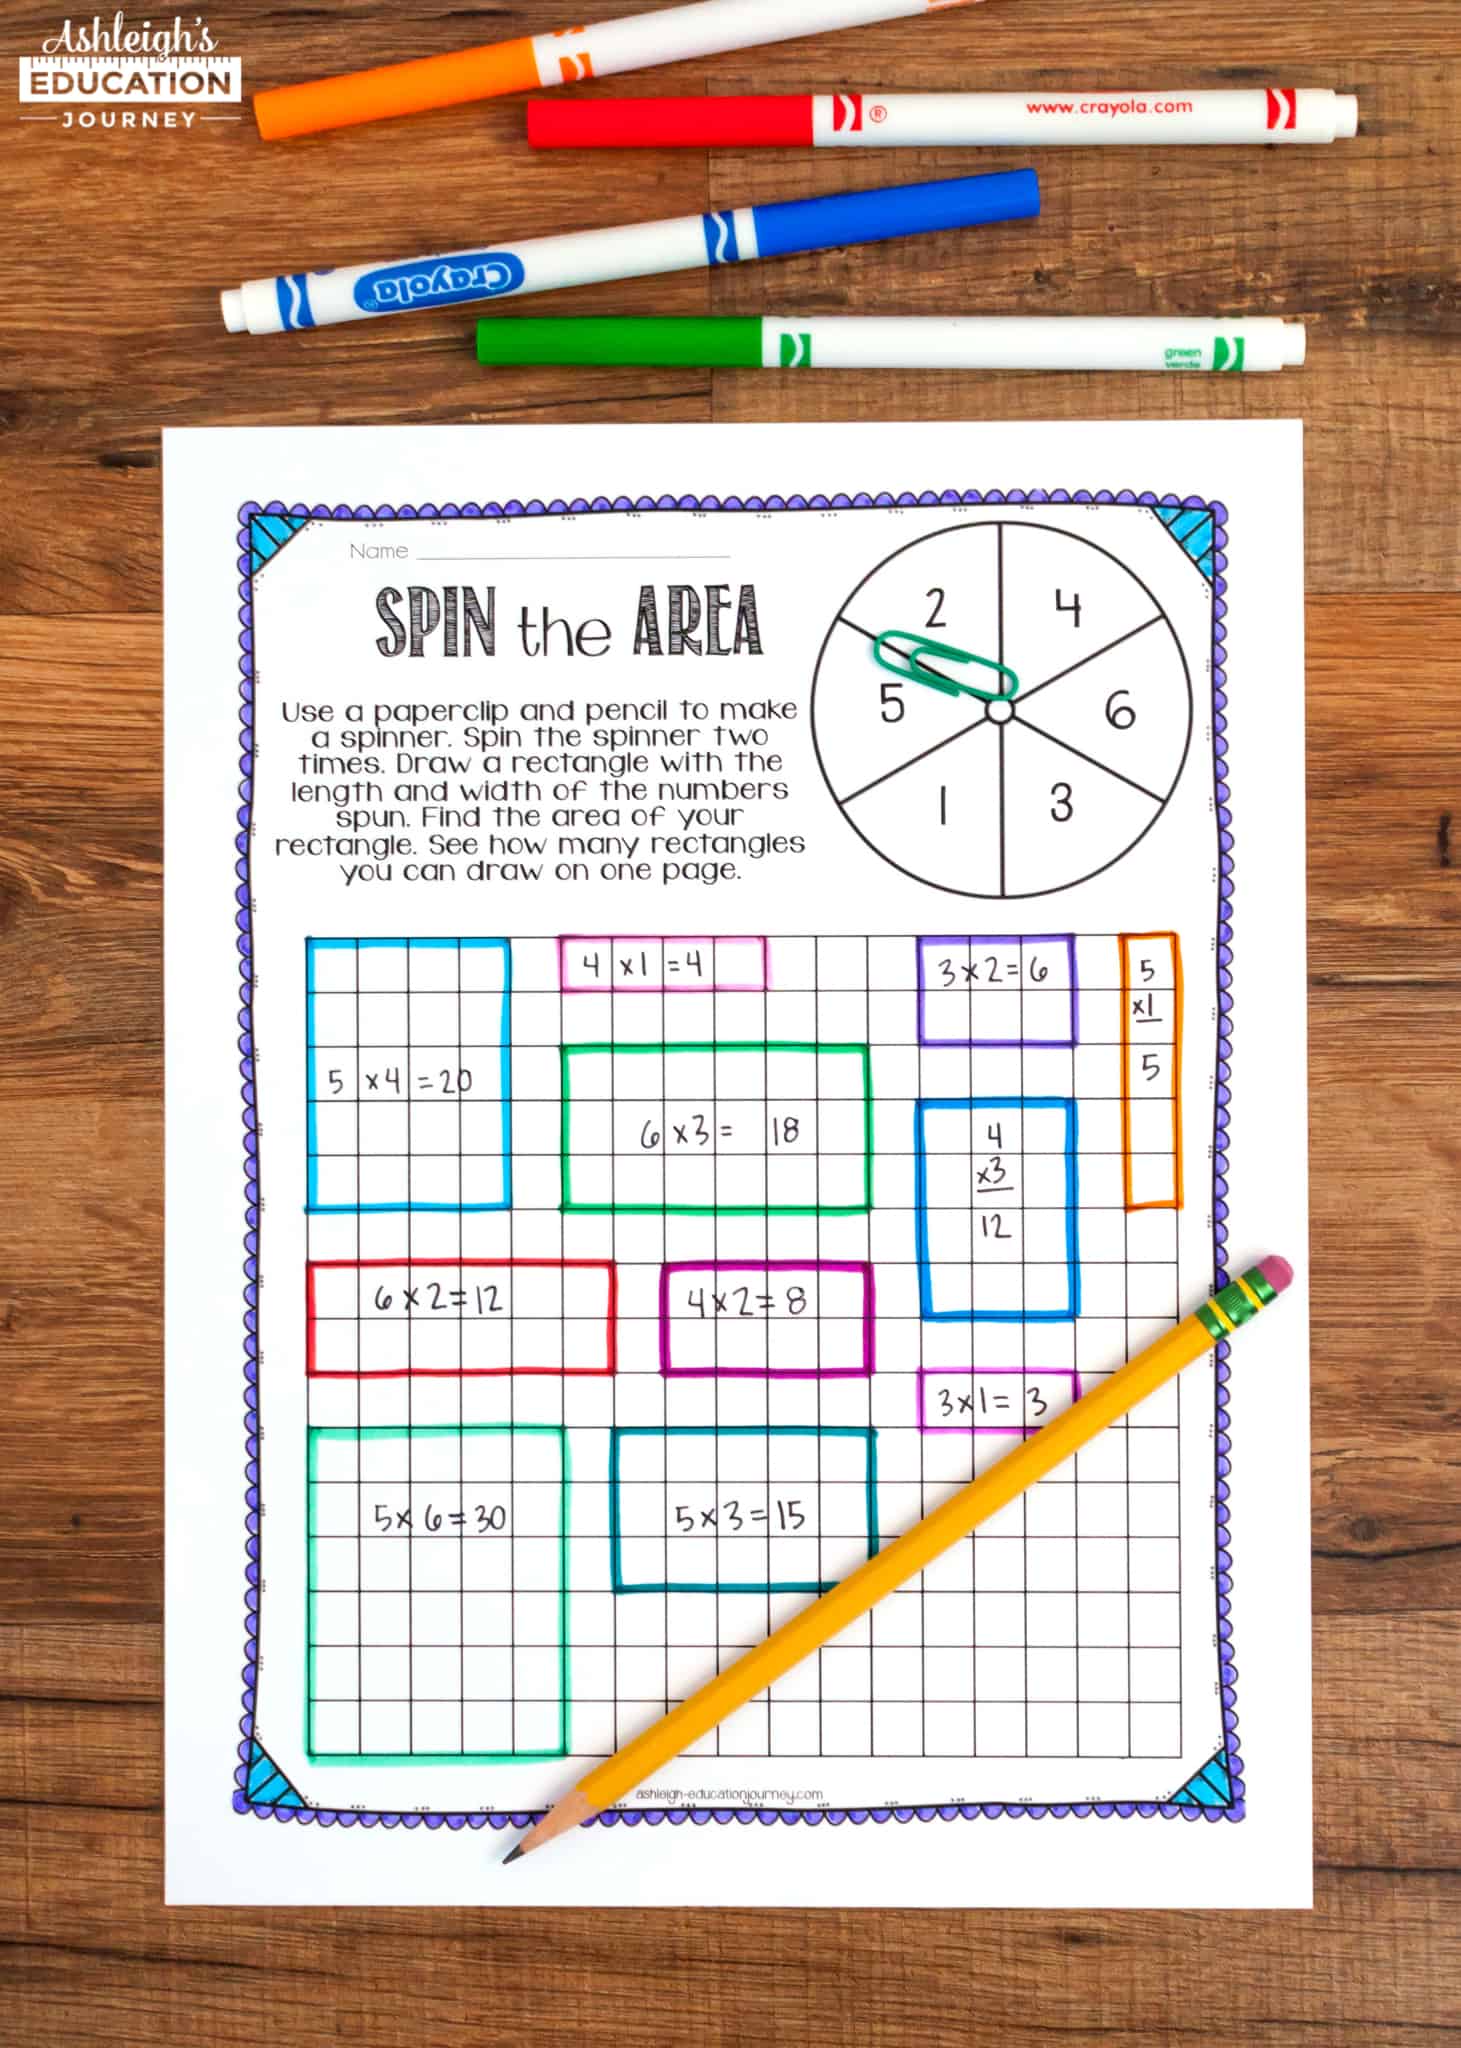 Teaching Area And Perimeter - Ashleigh's Education Journey